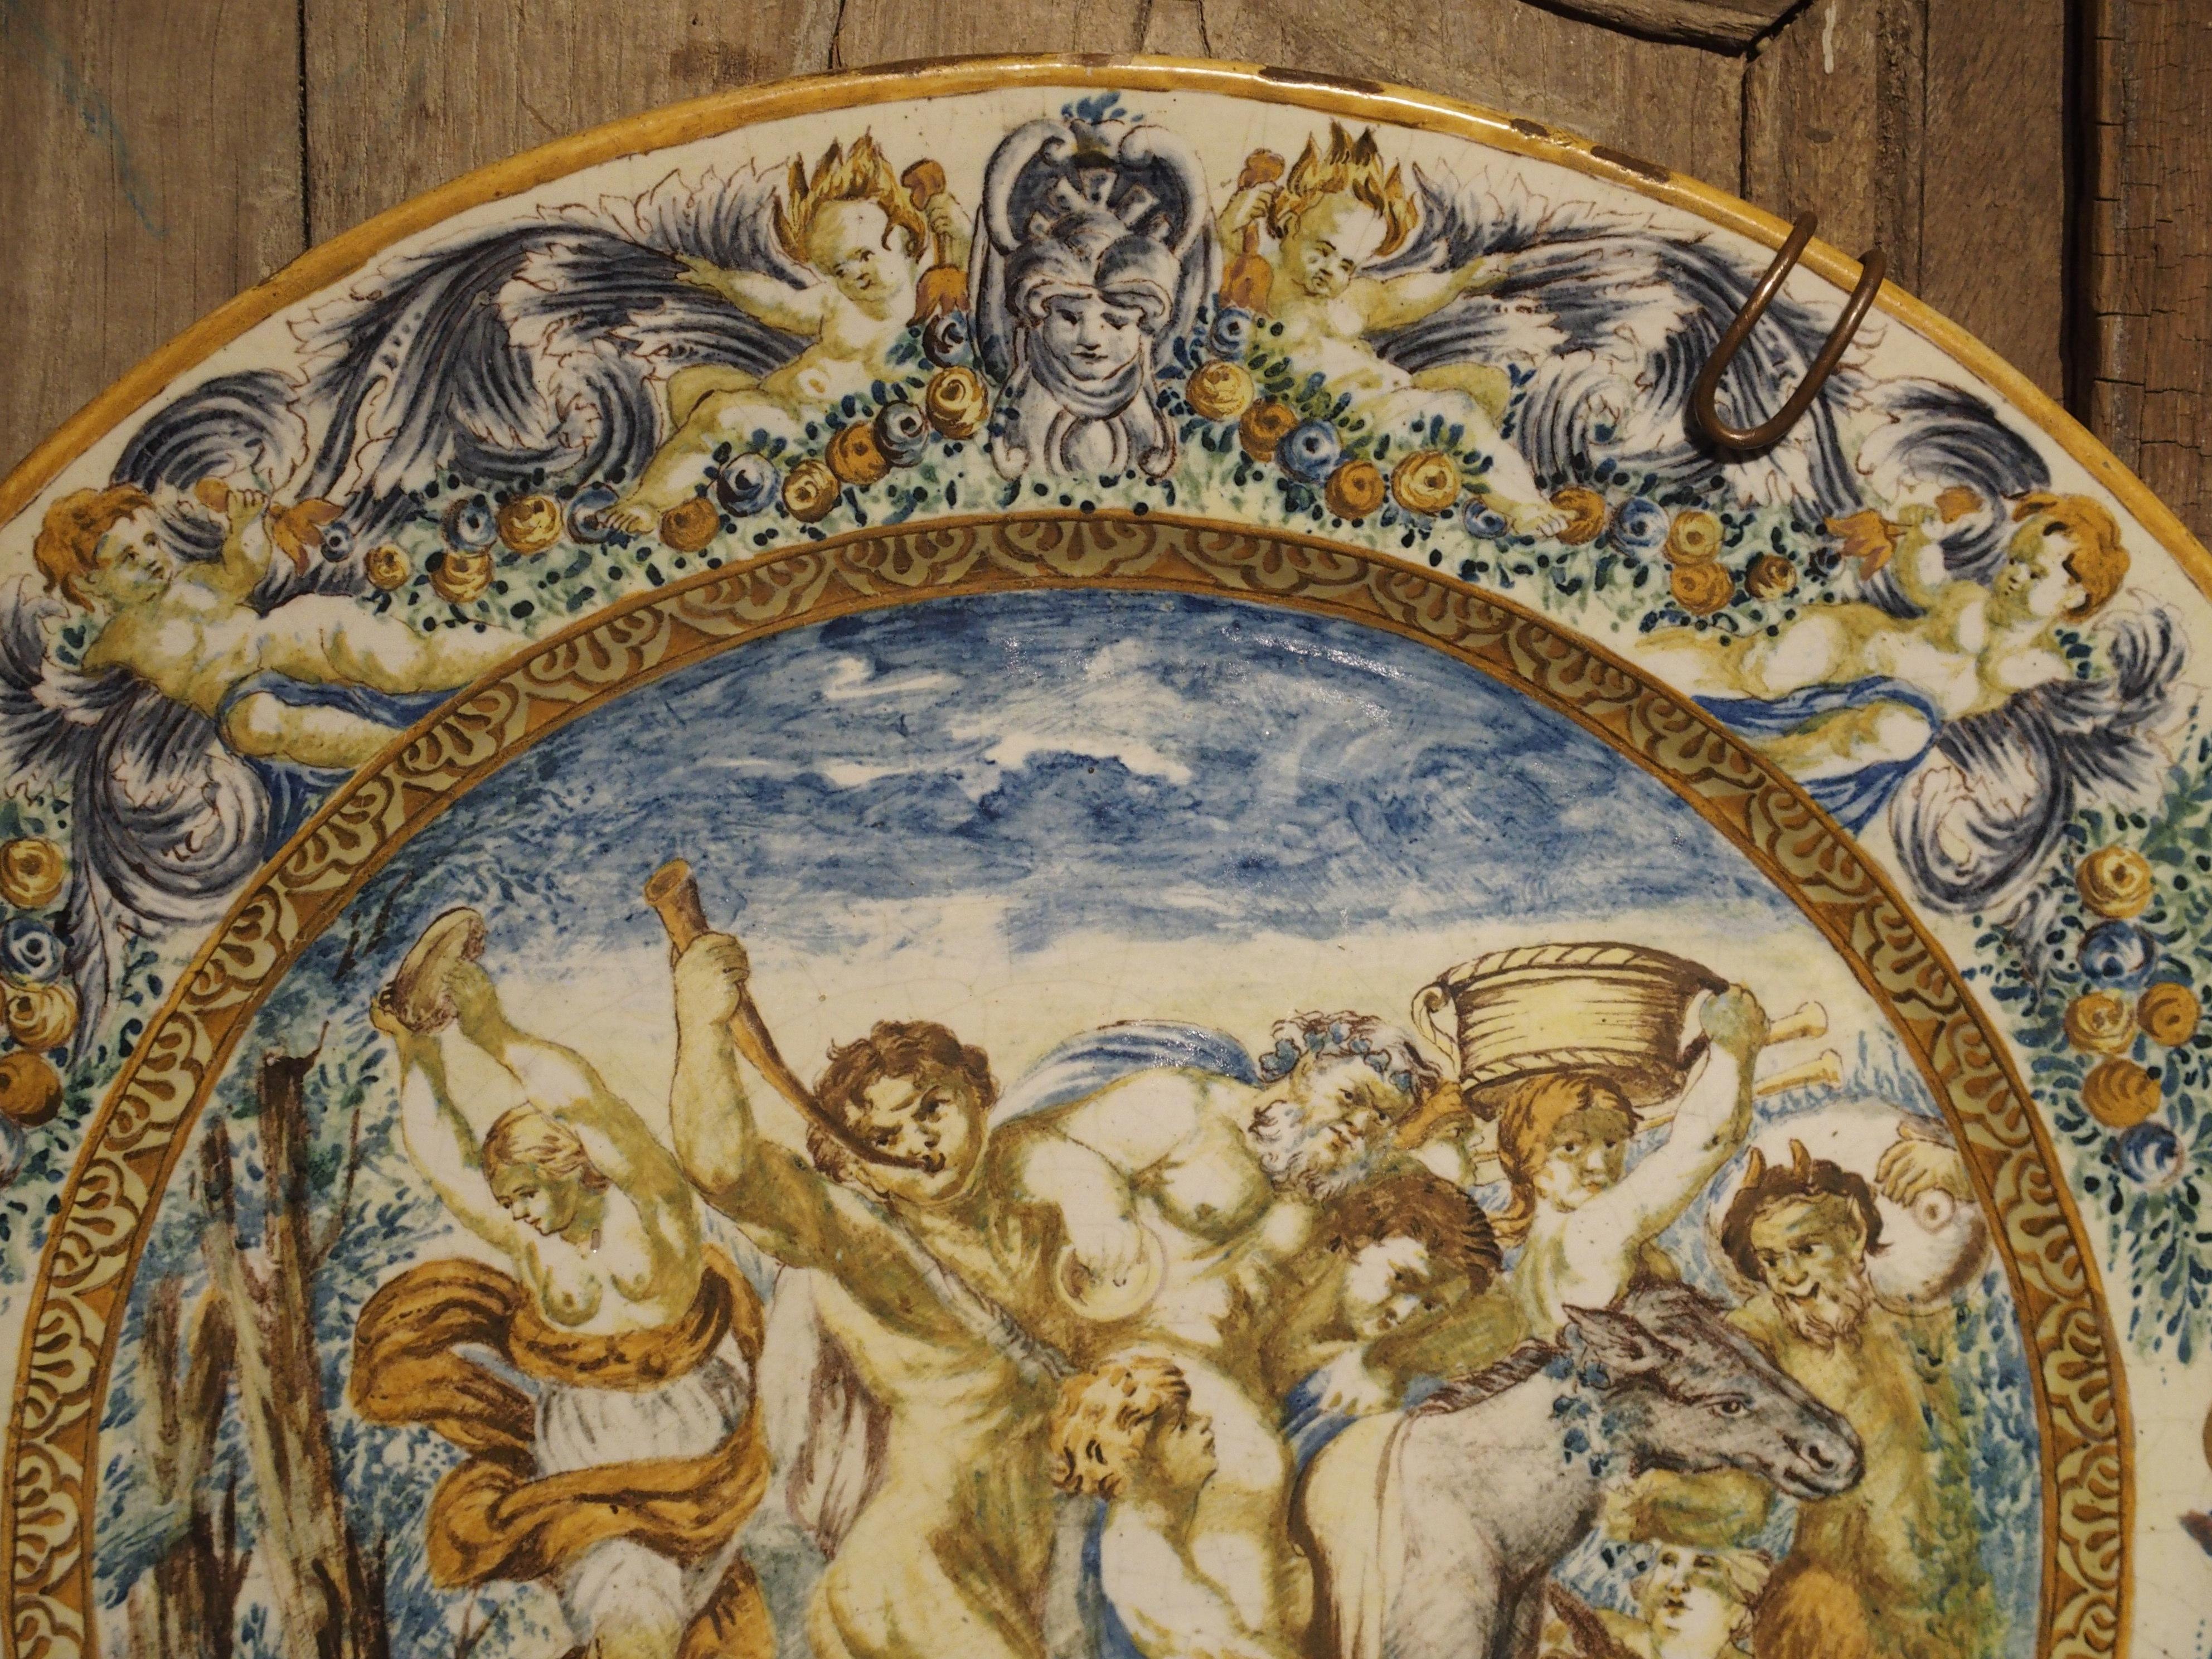 Italian Large Antique Hand Painted Majolica Platter from Italy, circa 1860